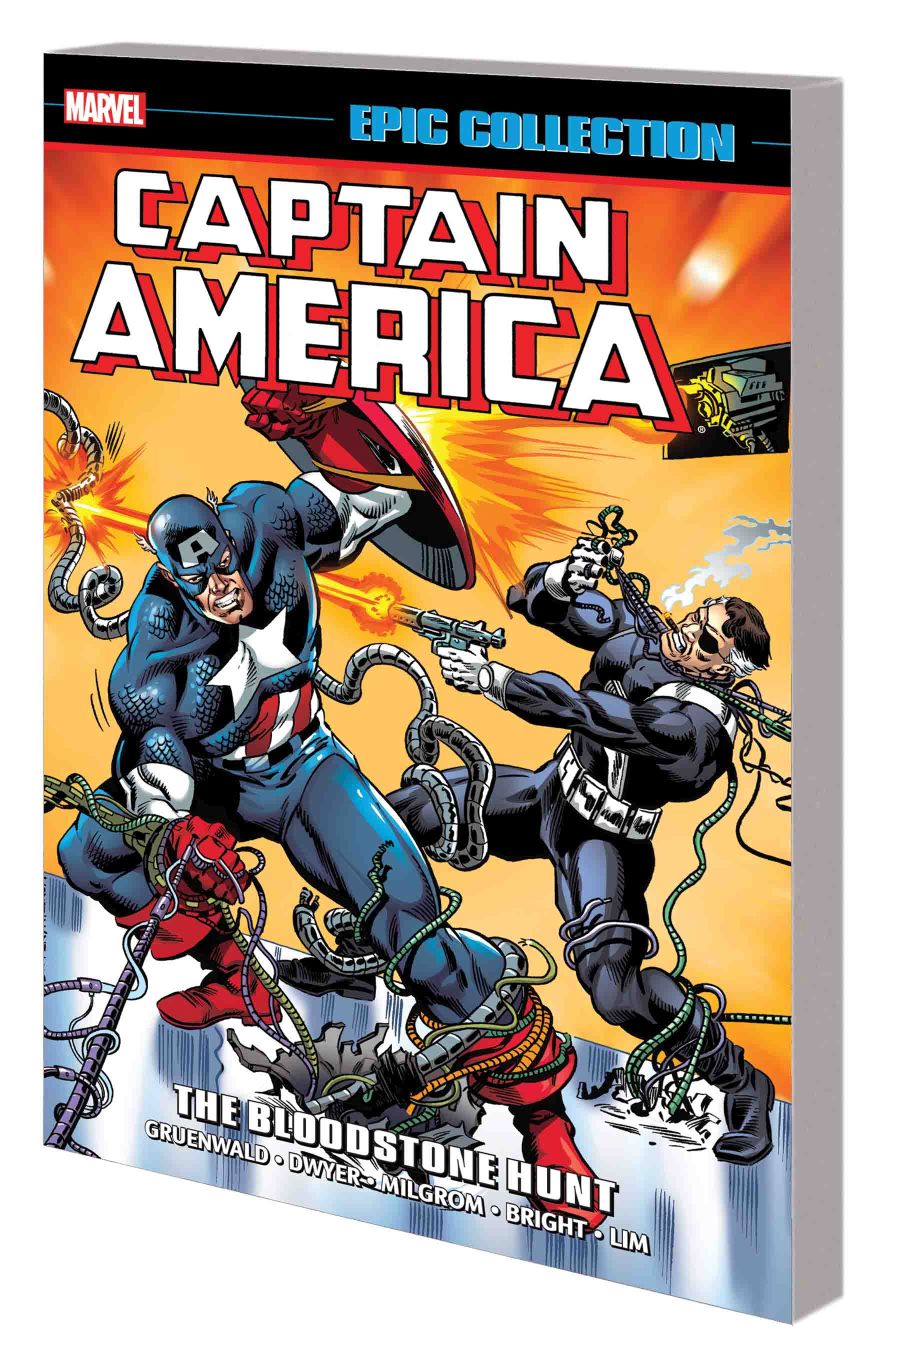 CAPTAIN AMERICA EPIC COLLECTION: THE BLOODSTONE HUNT TPB